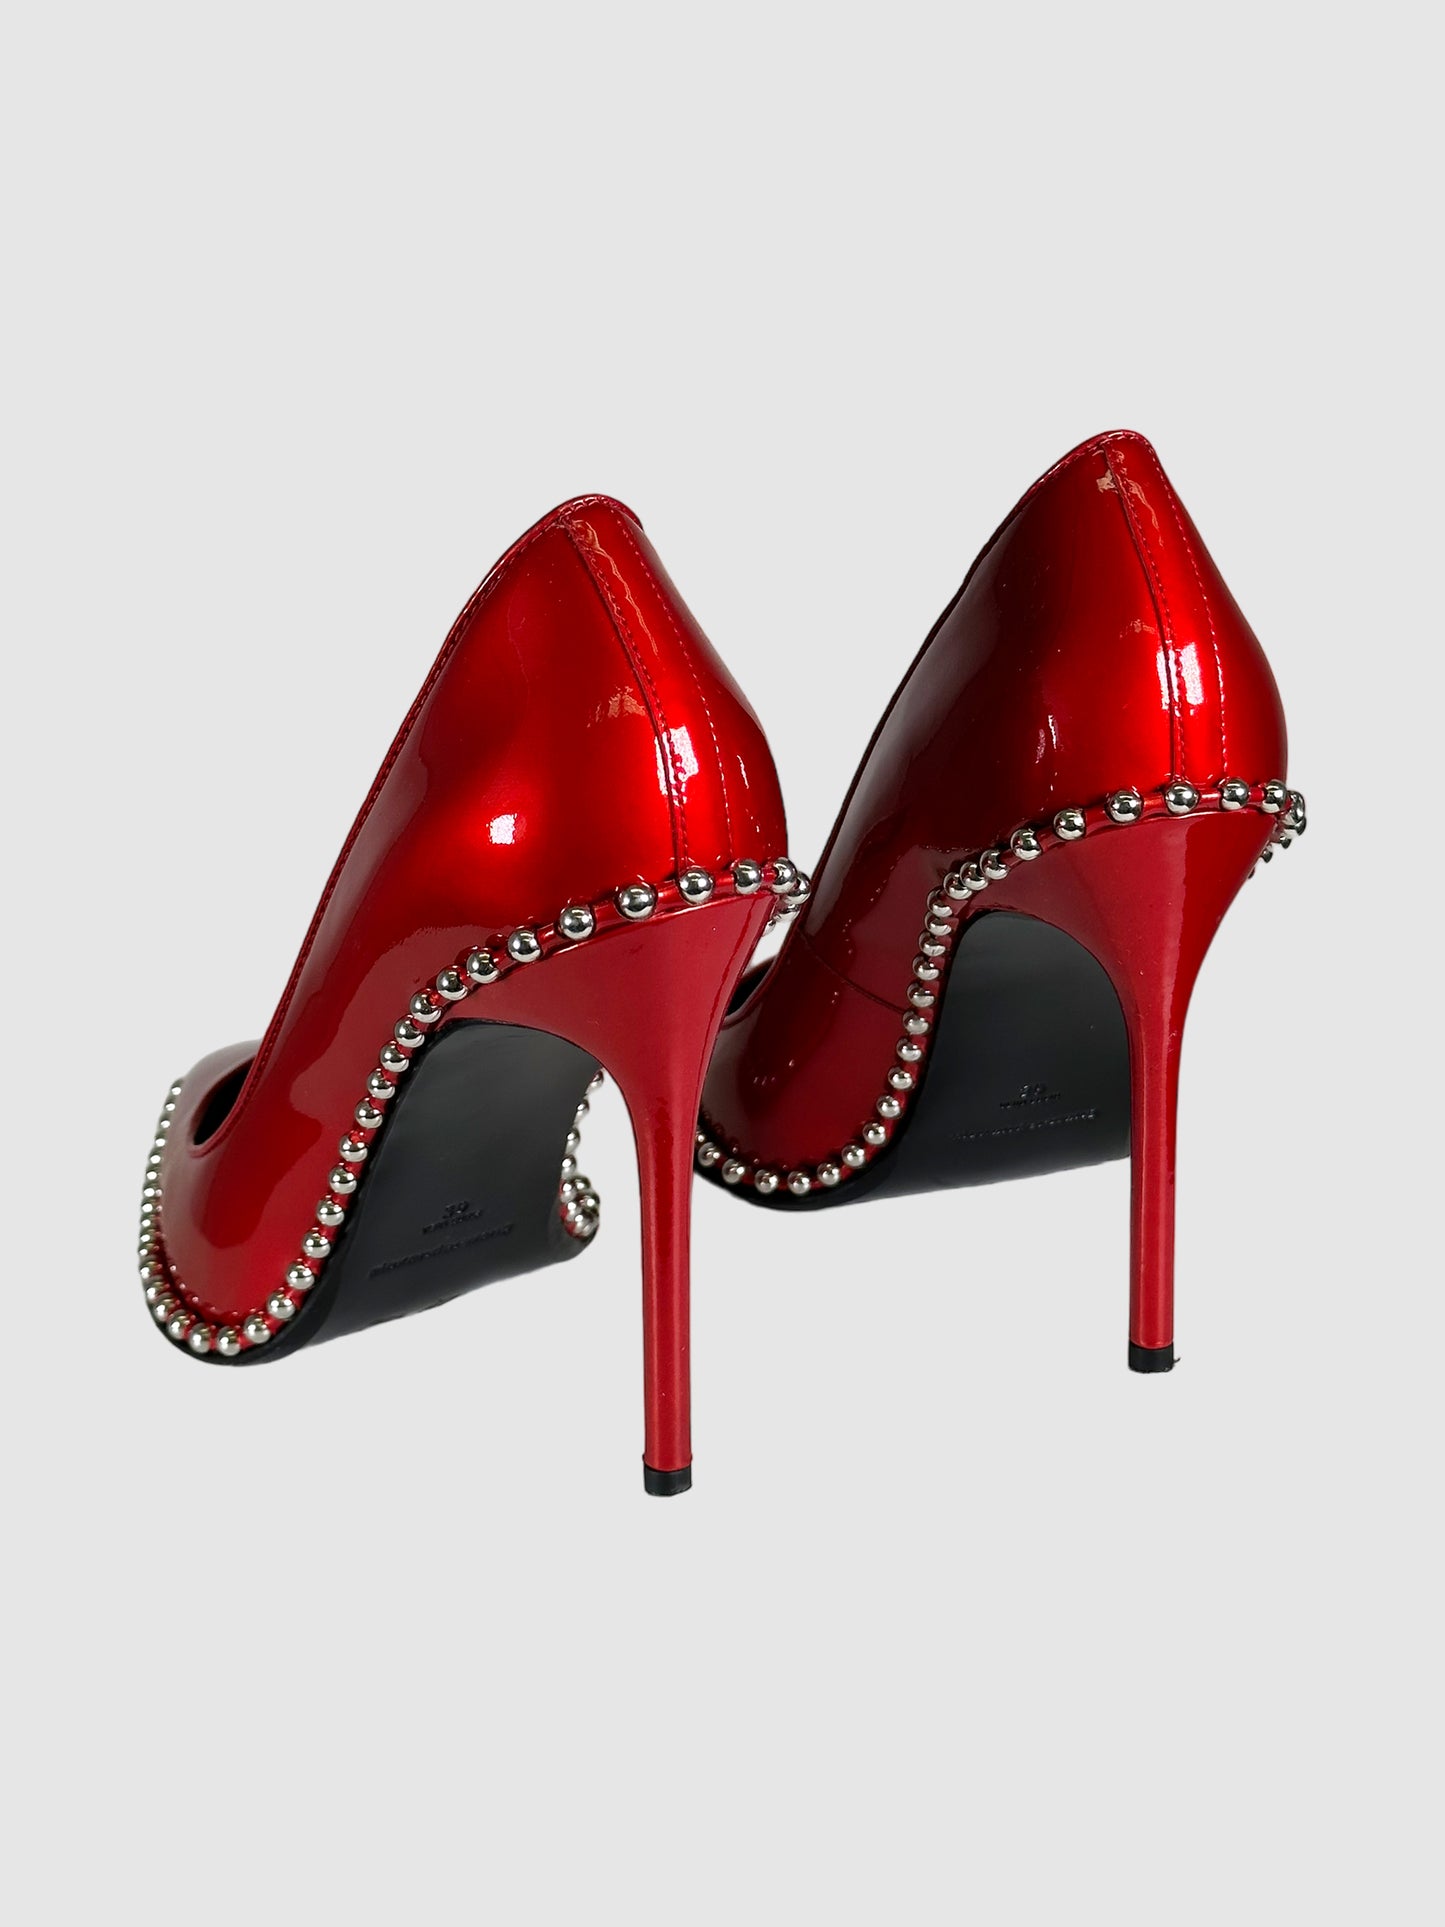 Patent Leather Studded Accents Pumps - Size 39